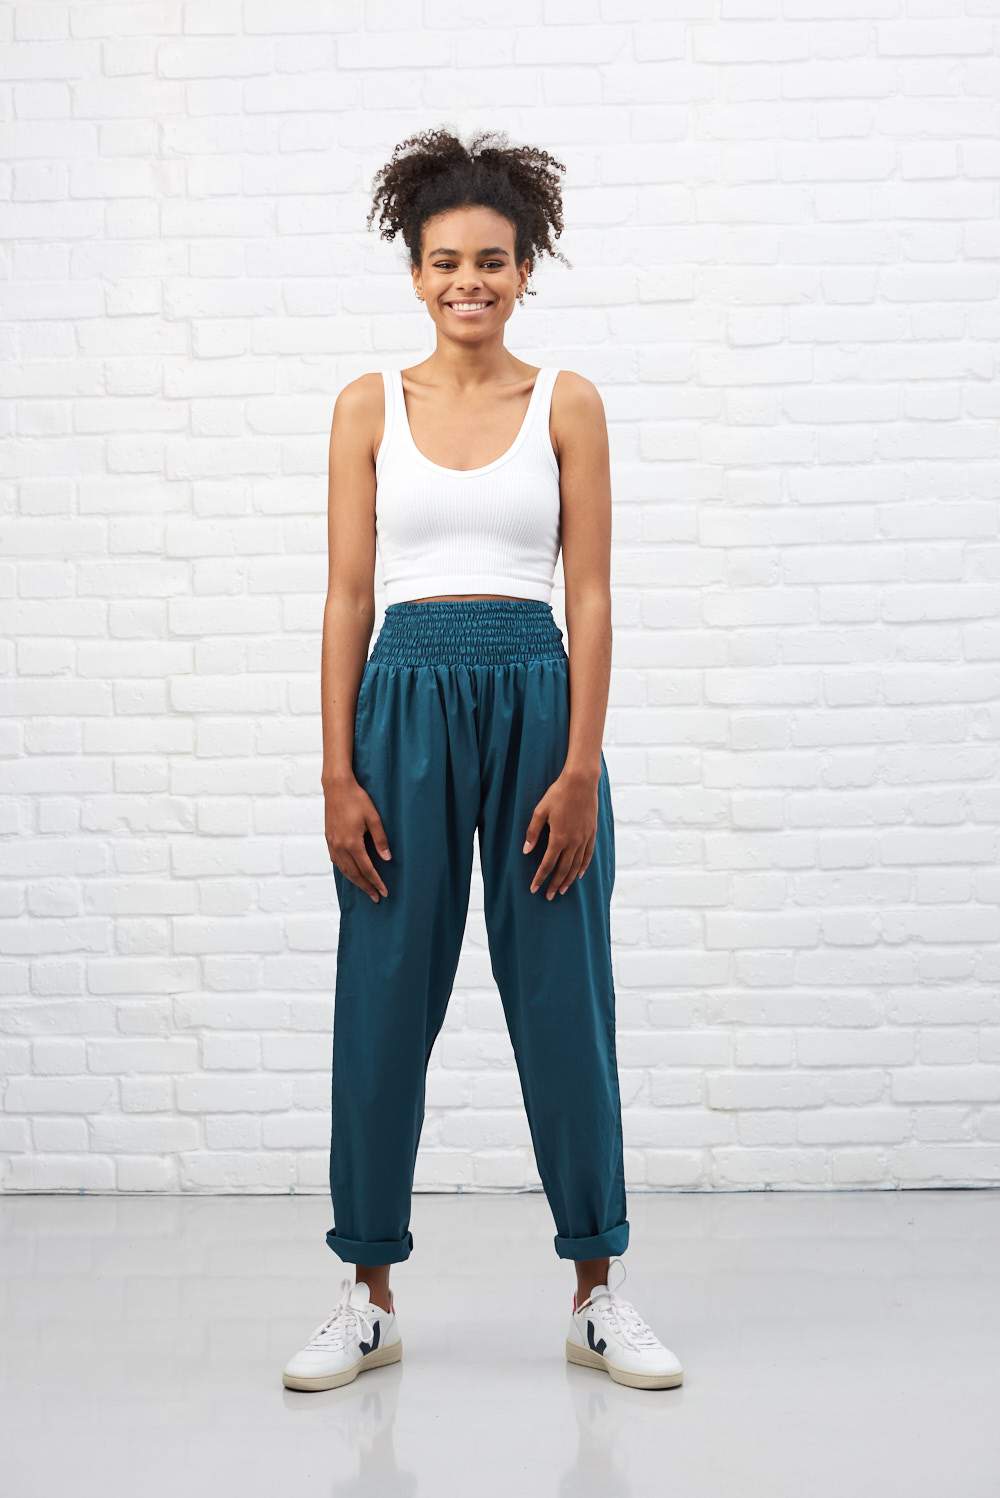 'Organic Taupo' High Waist Cotton Trousers in Petrol Blue by Lucy and Yak